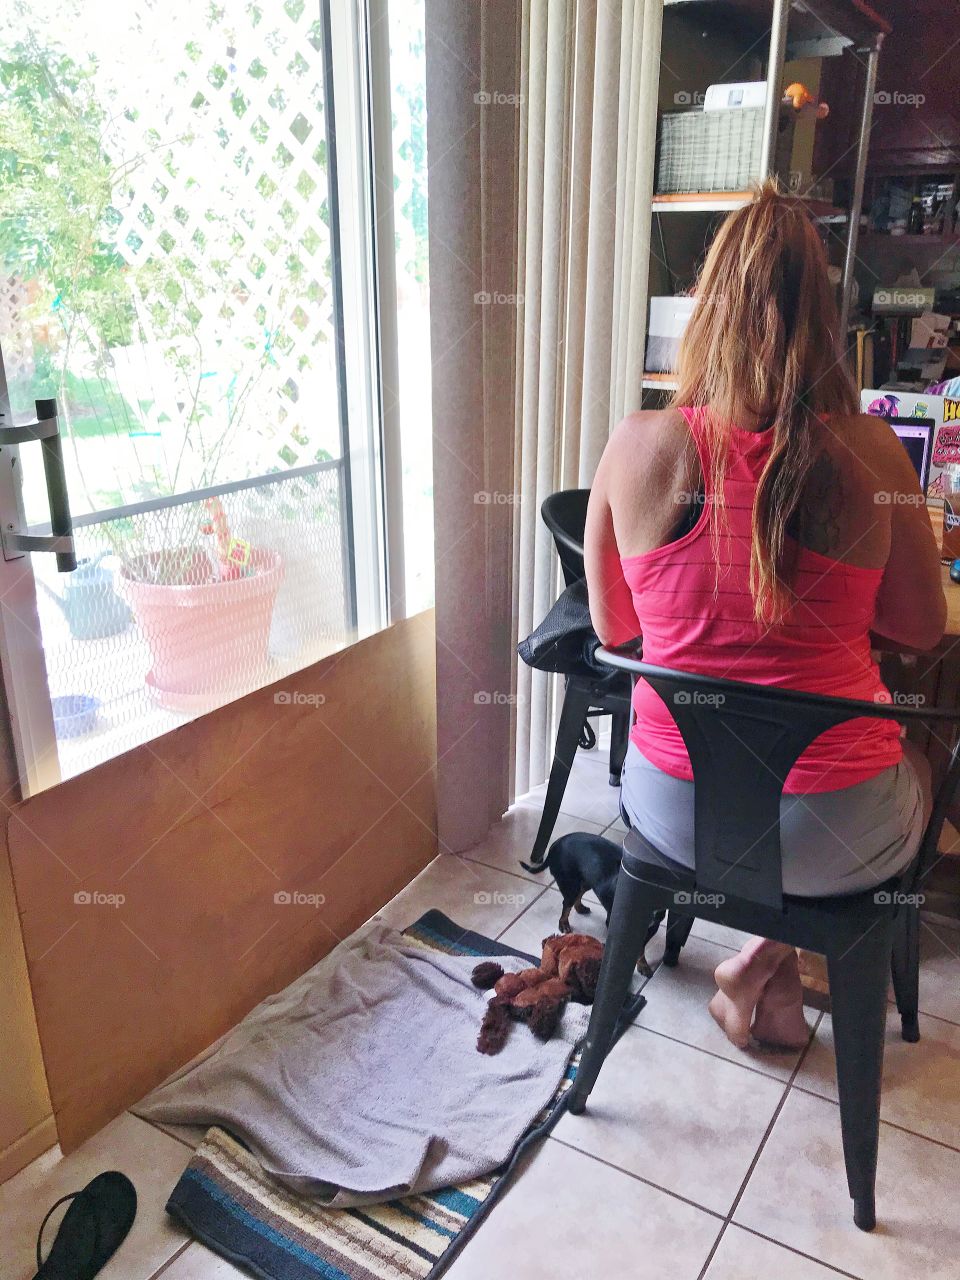 Working from home during the coronavirus pandemic near a big open window, woman working